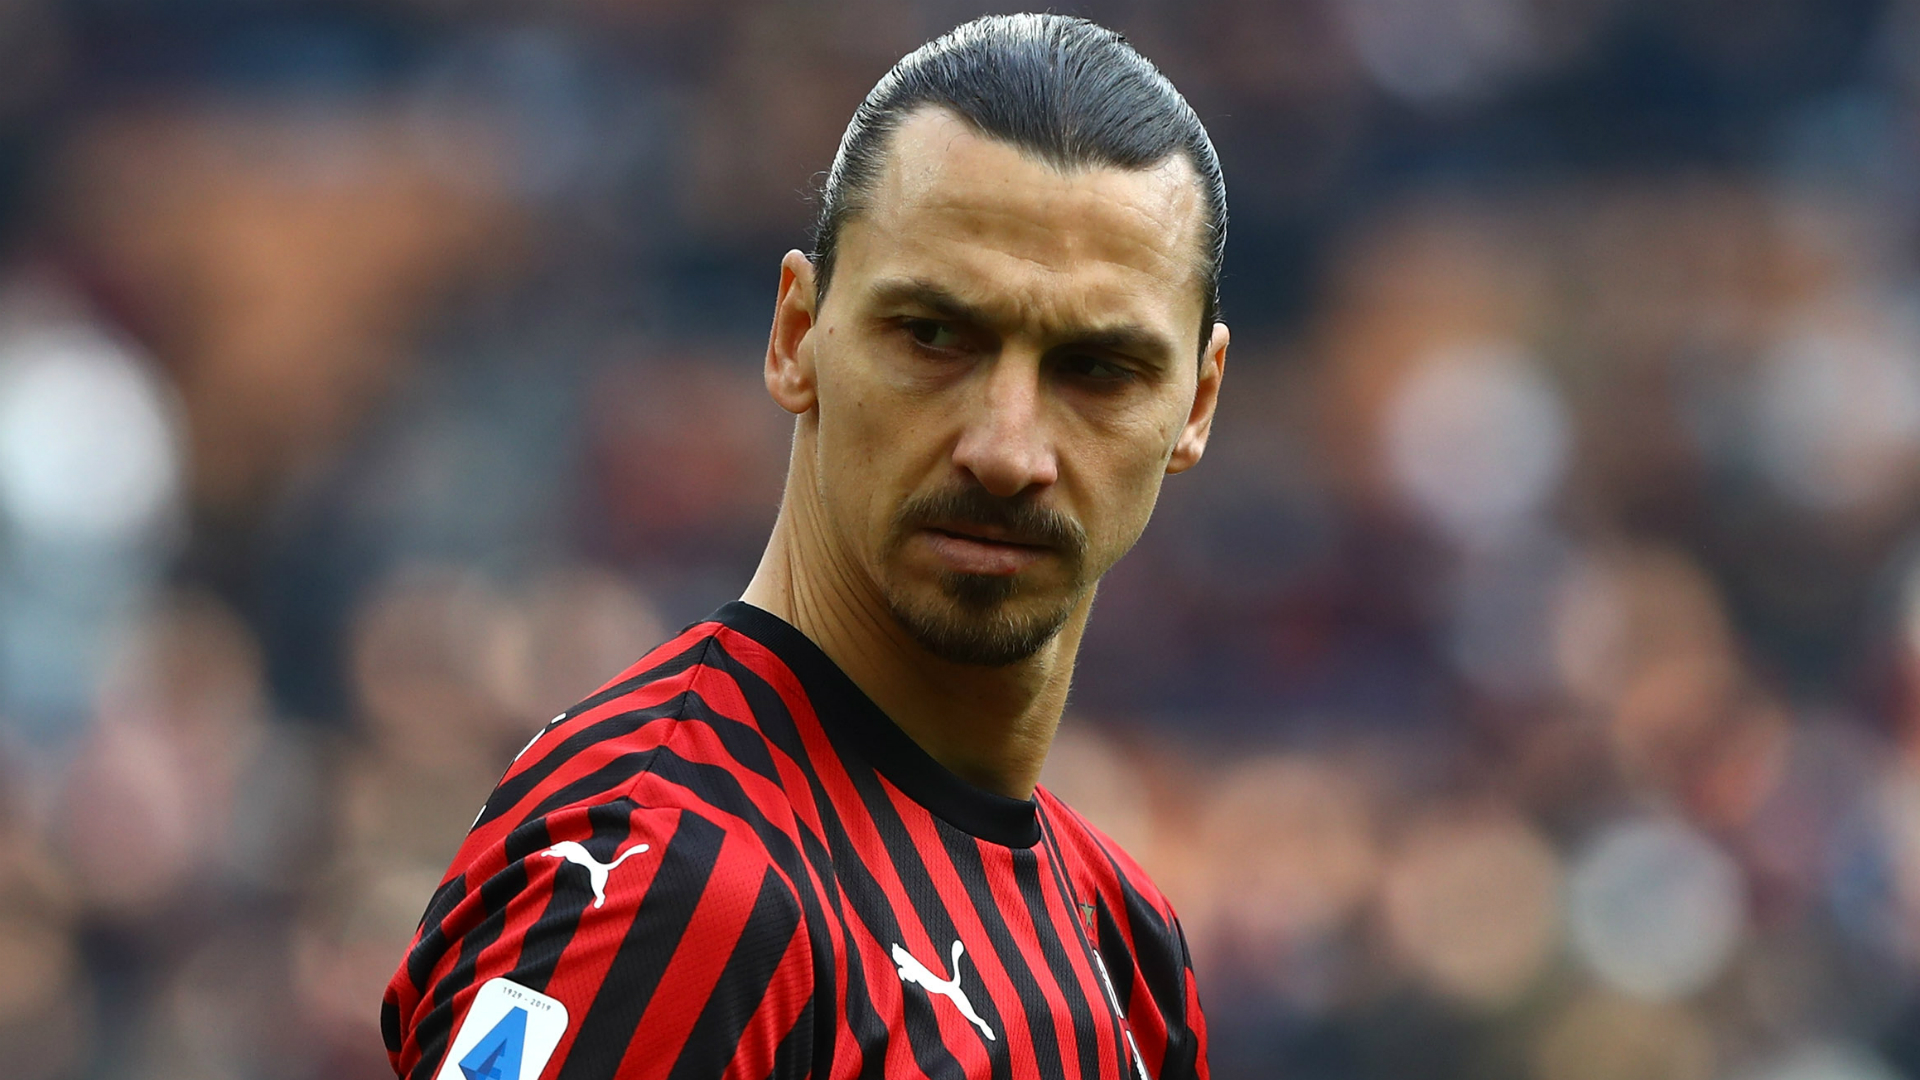 Ibrahimovic's AC Milan career may be over after sustaining injury in training